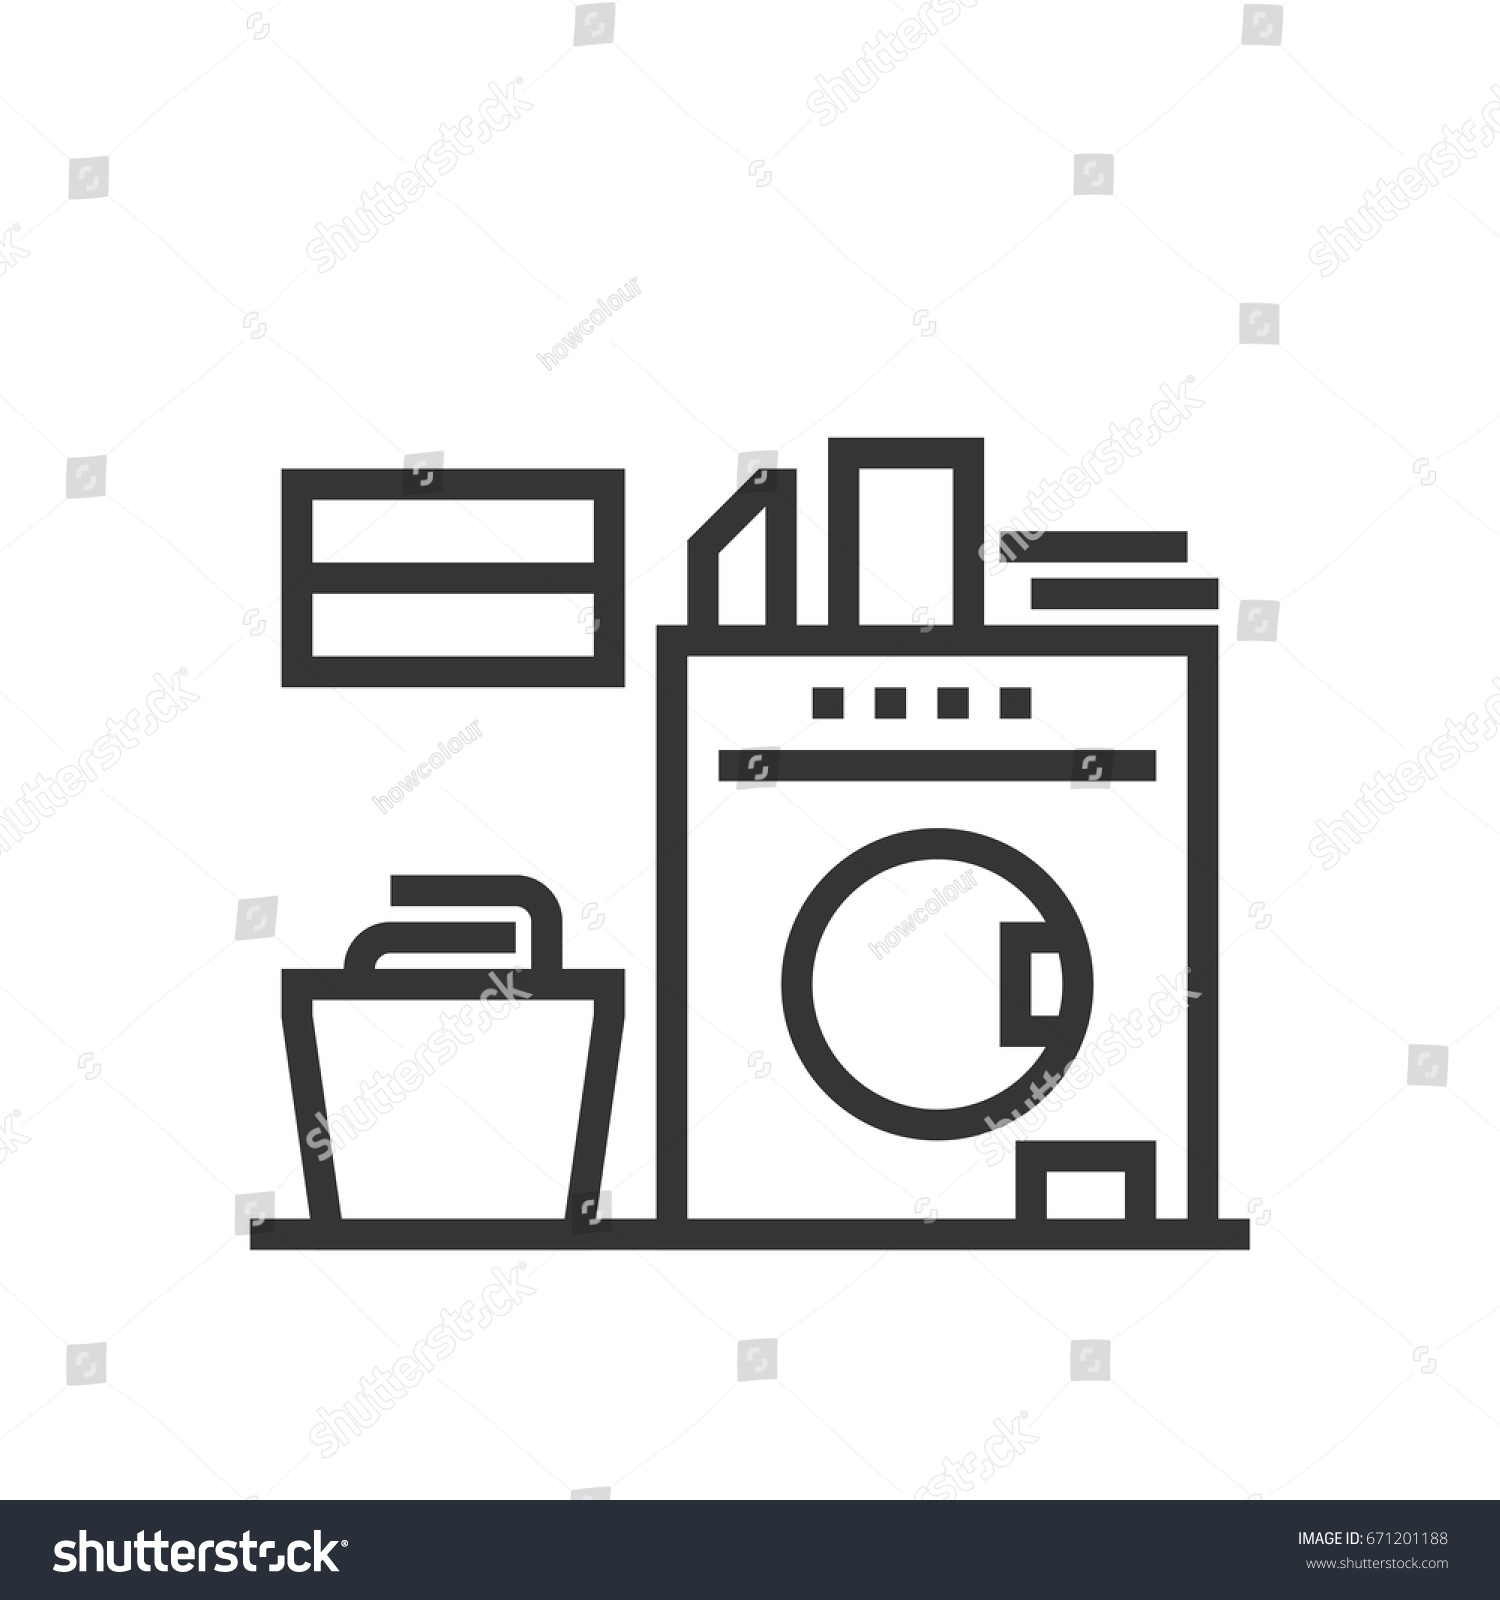 SVG of Washing machine icon, part of the square icons, real estate icon set. The illustration is a vector, editable stroke, thirty-two by thirty-two matrix grid, pixel perfect file. svg